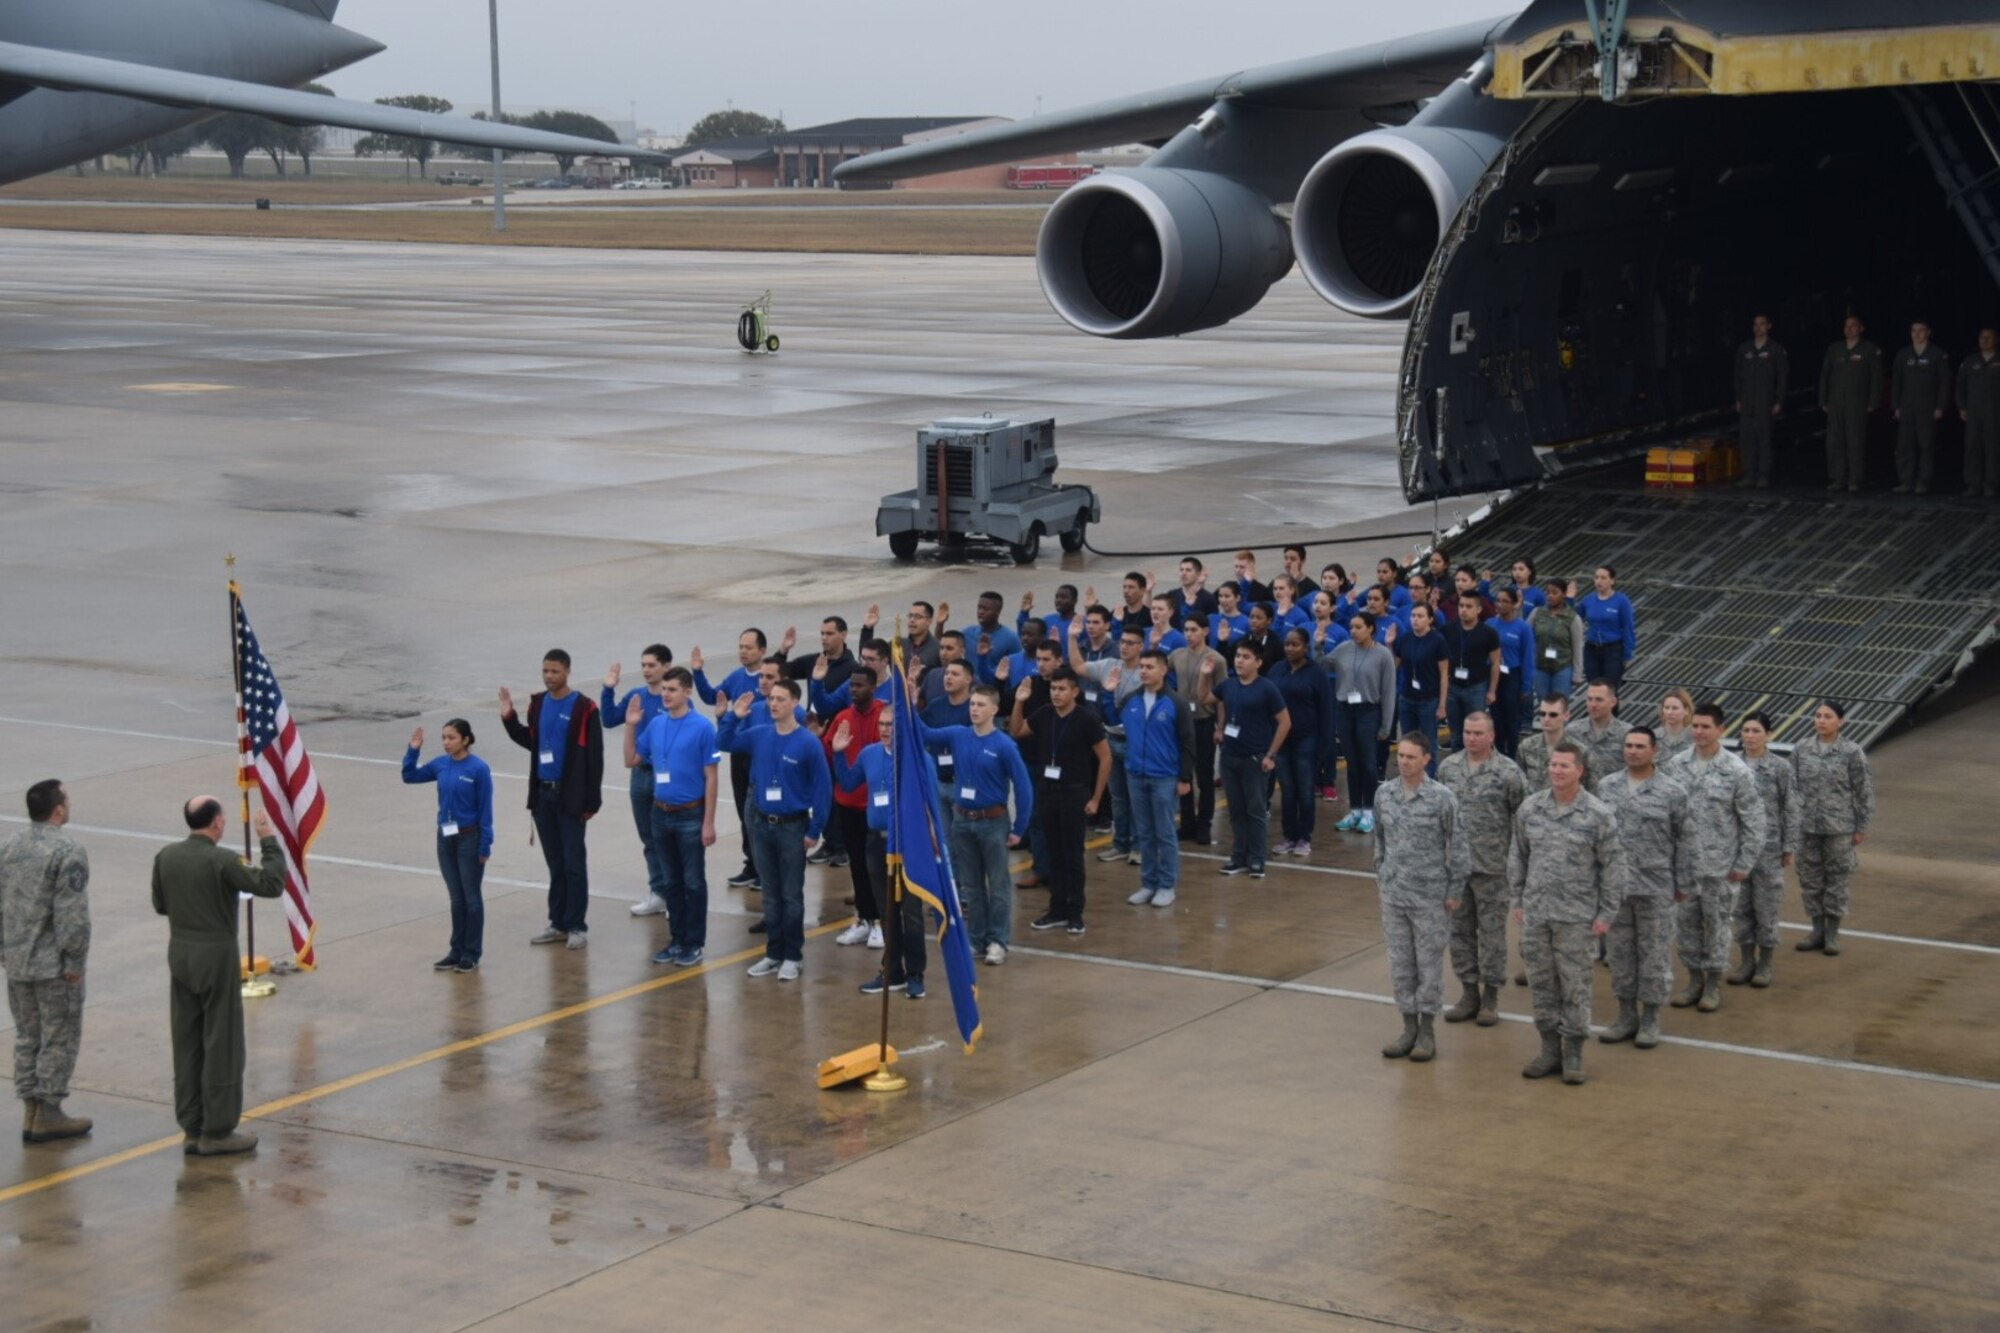 Despite the wet weather, Col. Thomas K. Smith, Jr., 433rd Airlift Wing commander, administers the Oath of Enlistment to 48 future 433rd Airlift Wing Reserve Citizen Airmen Feb. 10, 2018 at Joint Base San Antonio-Lackland, Texas. The future Airmen, members of the Delayed enlistment Training Flight, were supported by Chief Master Sgt. Brian Pinsky, 433rd AW command chief, 10 recruiters, load masters and a flight engineer. (U.S. air Force photo/Tech. Sgt. Carlos J. Trevino)